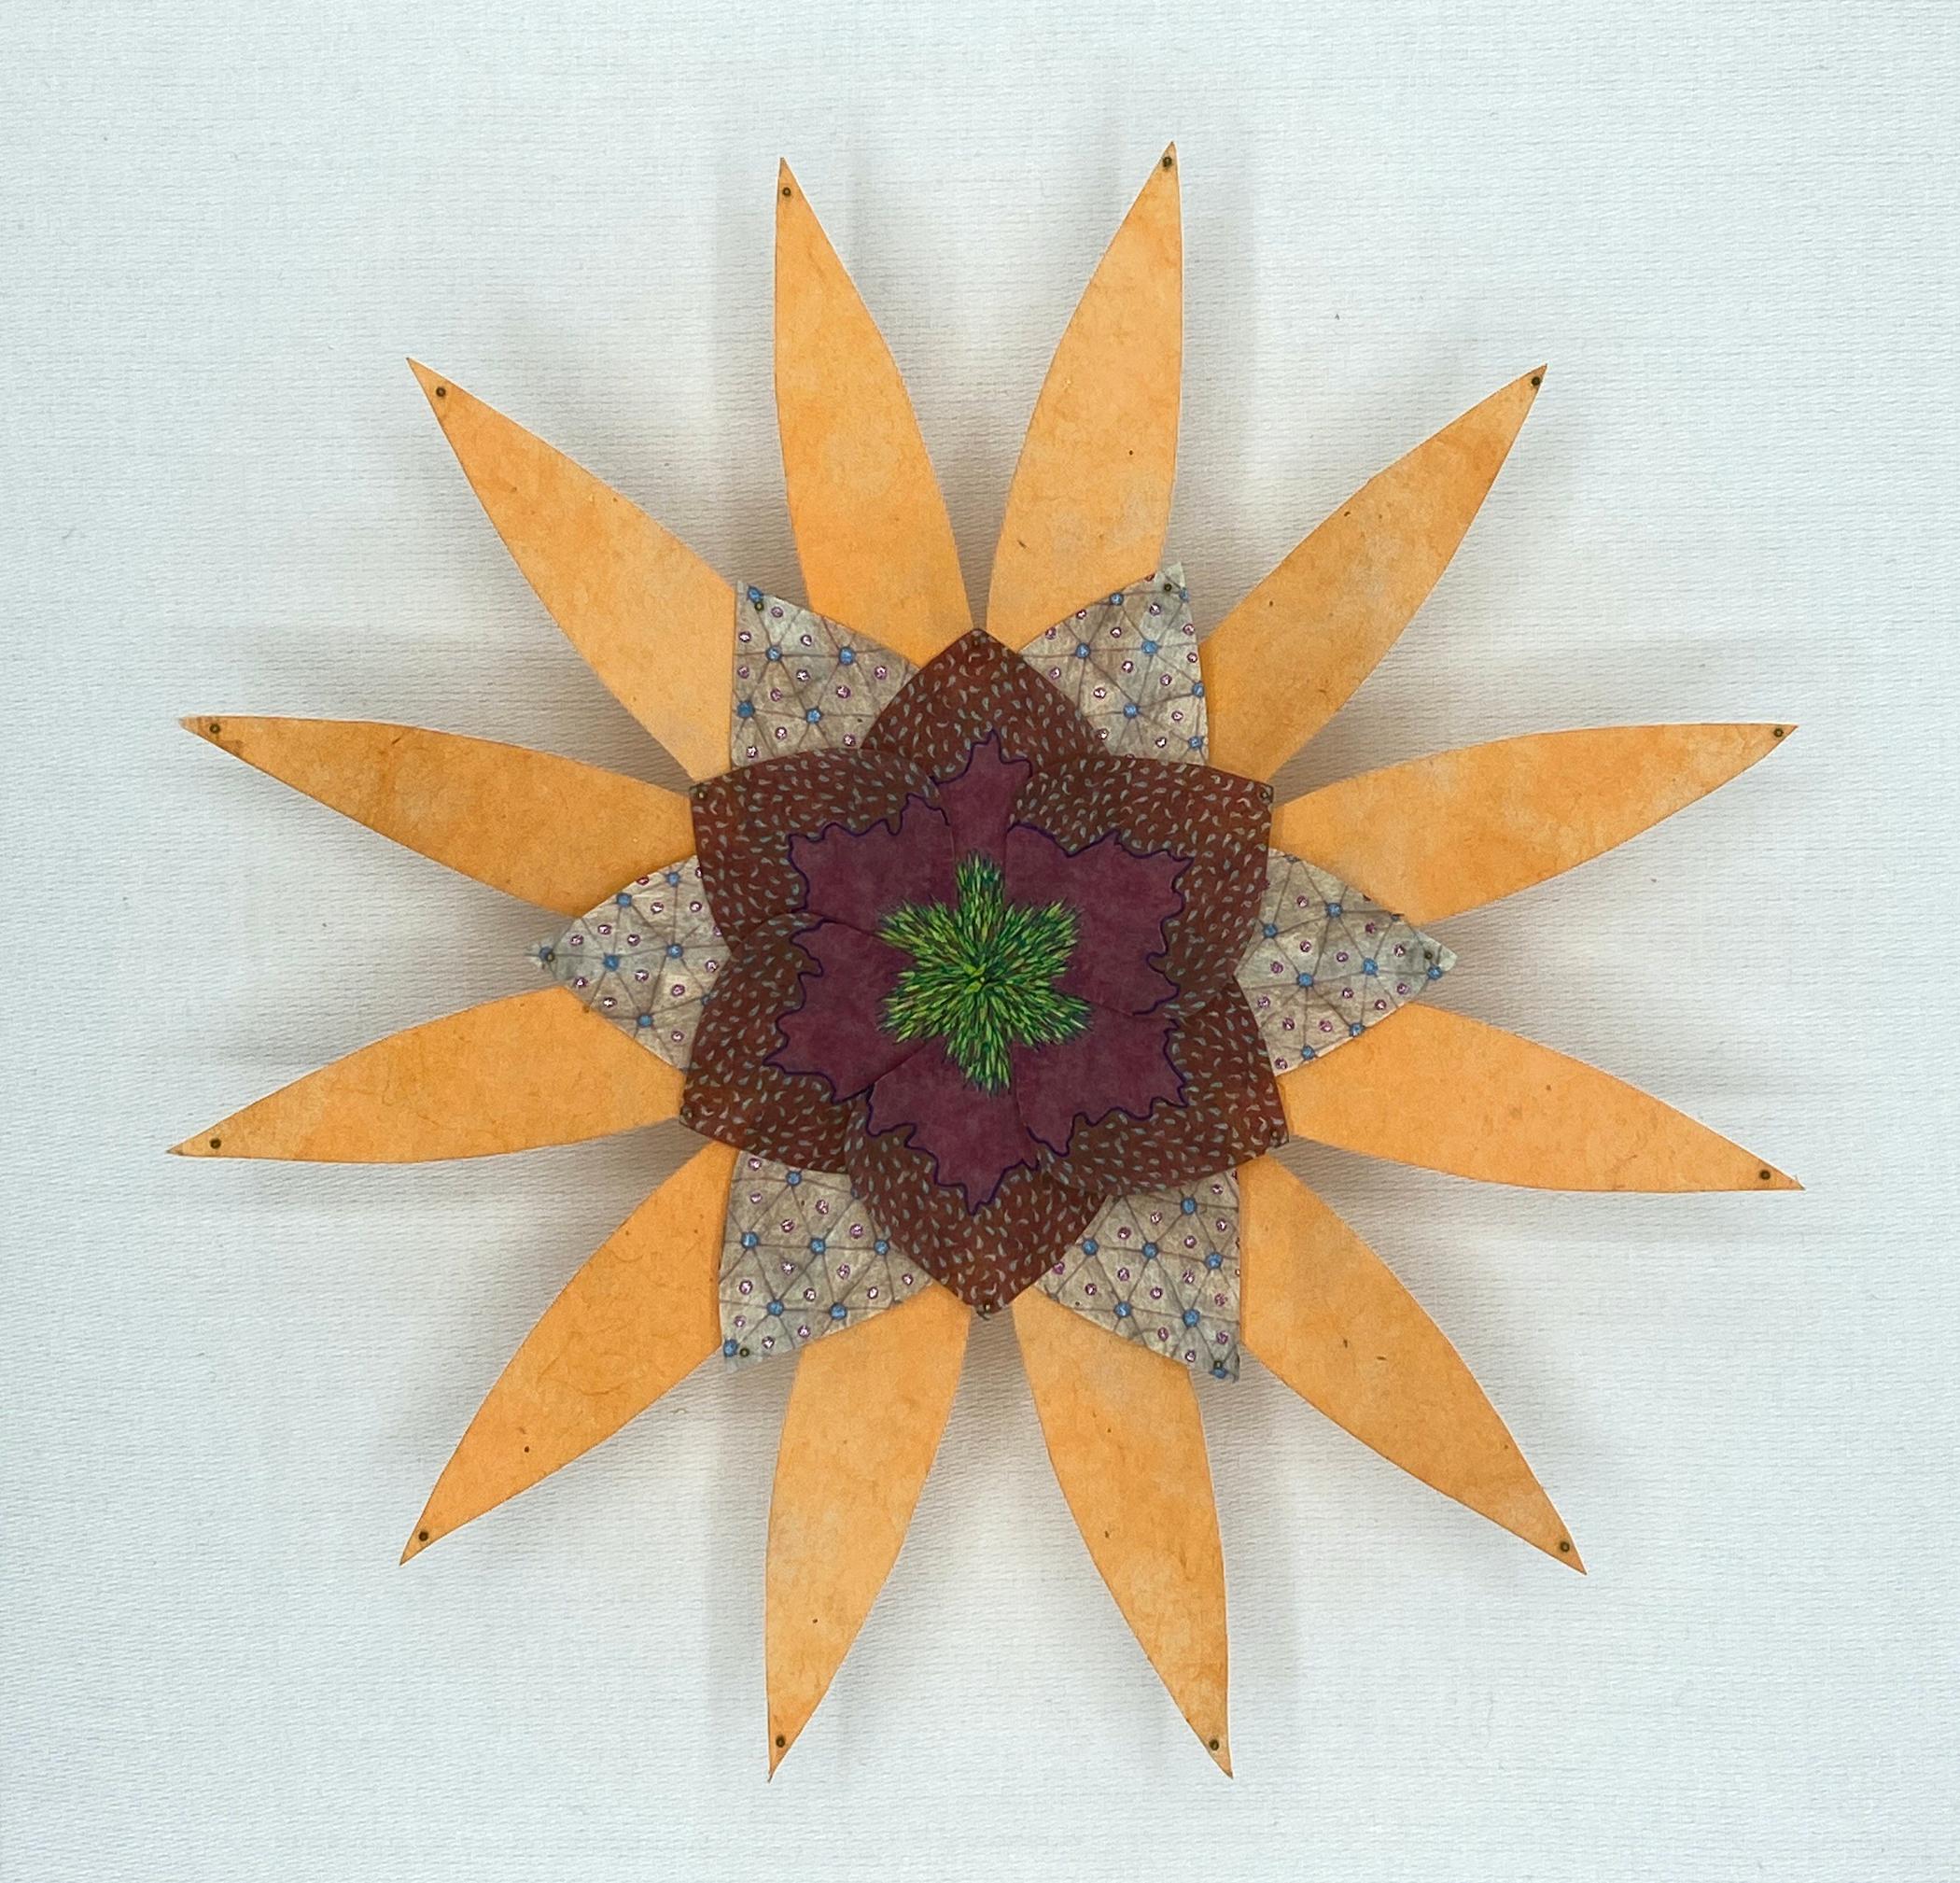 Jill Parisi Abstract Sculpture - Earth and Sky Star, Colorful Botanical Paper Wall Sculpture, Light Orange Maroon